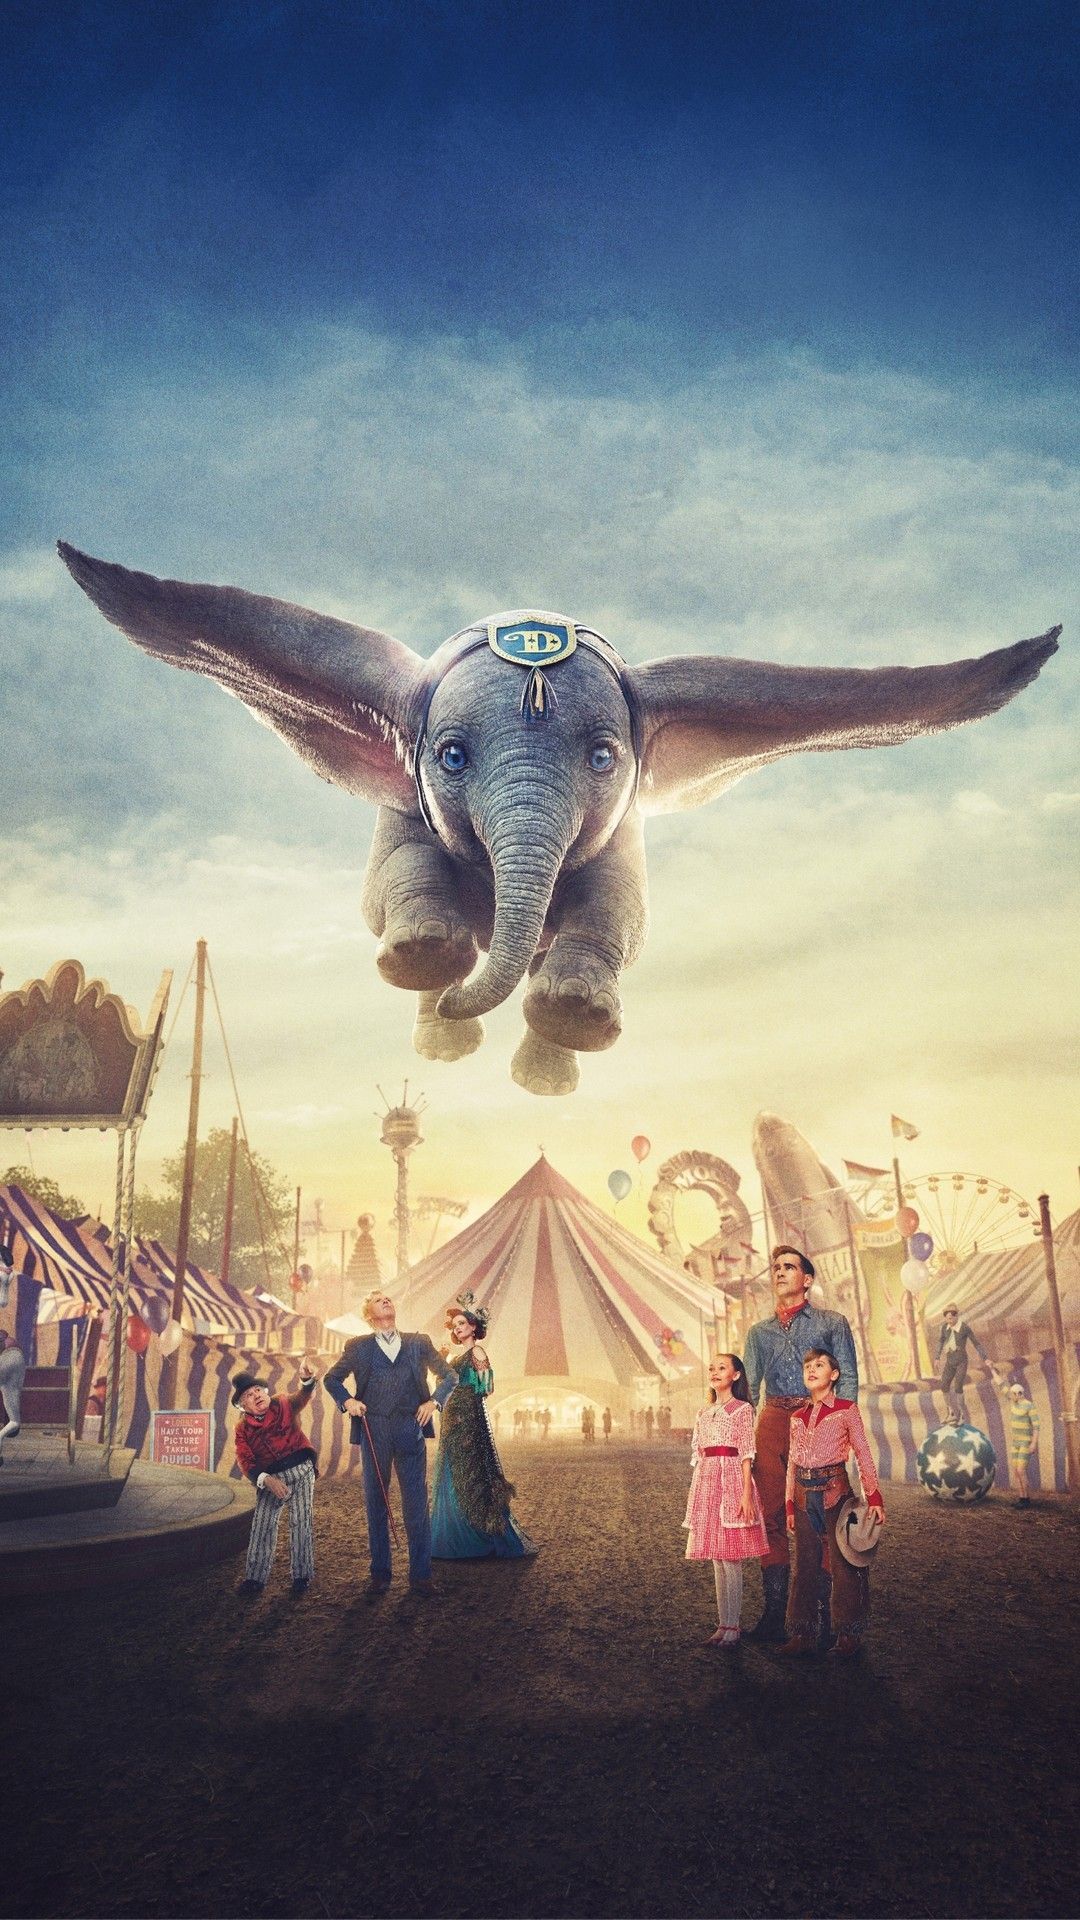 Dumbo 2019 Poster HD Movie Poster Wallpaper HD. Dumbo movie, Disney dumbo, Disney wallpaper